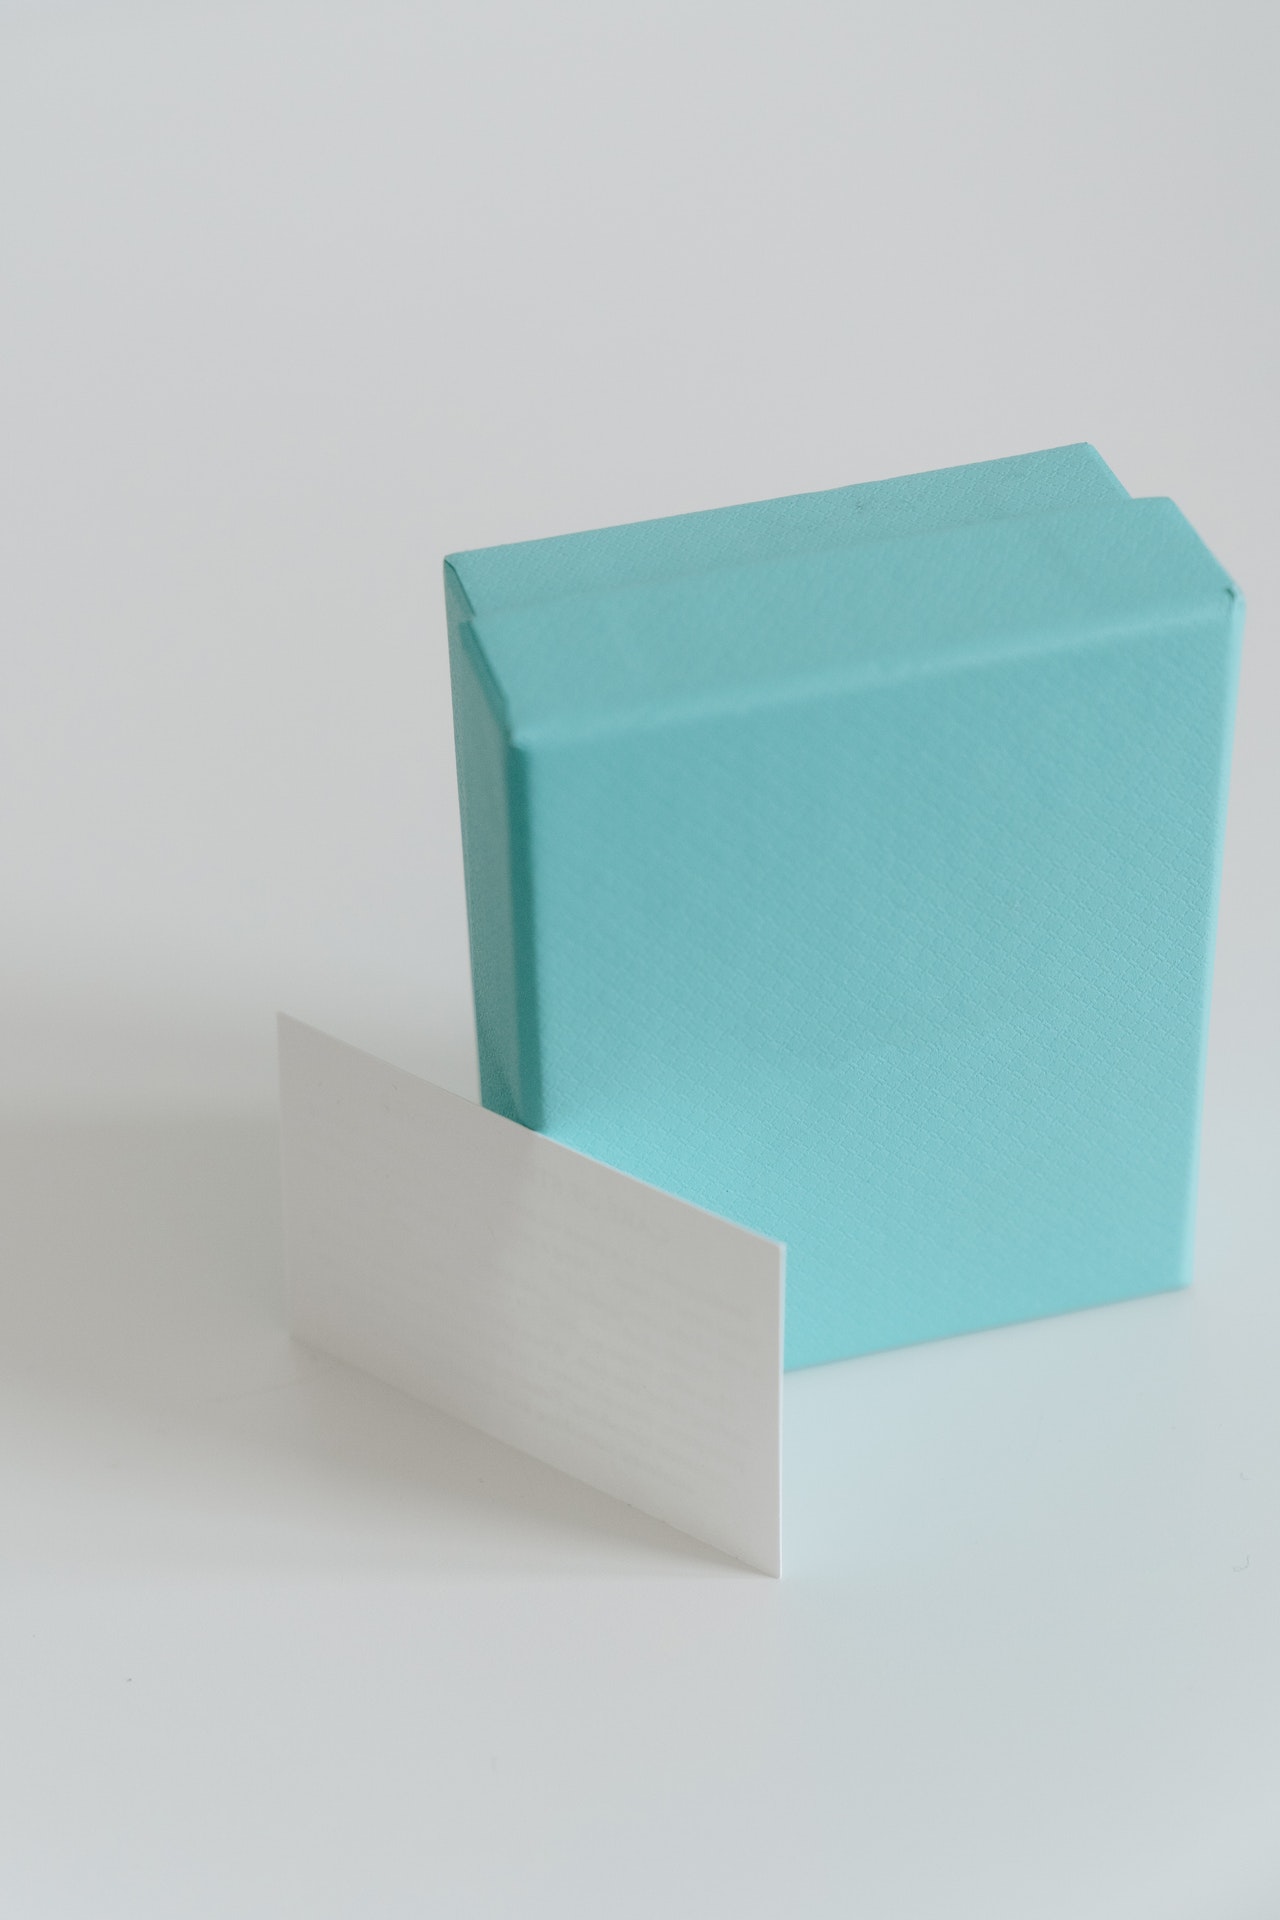 business card boxes